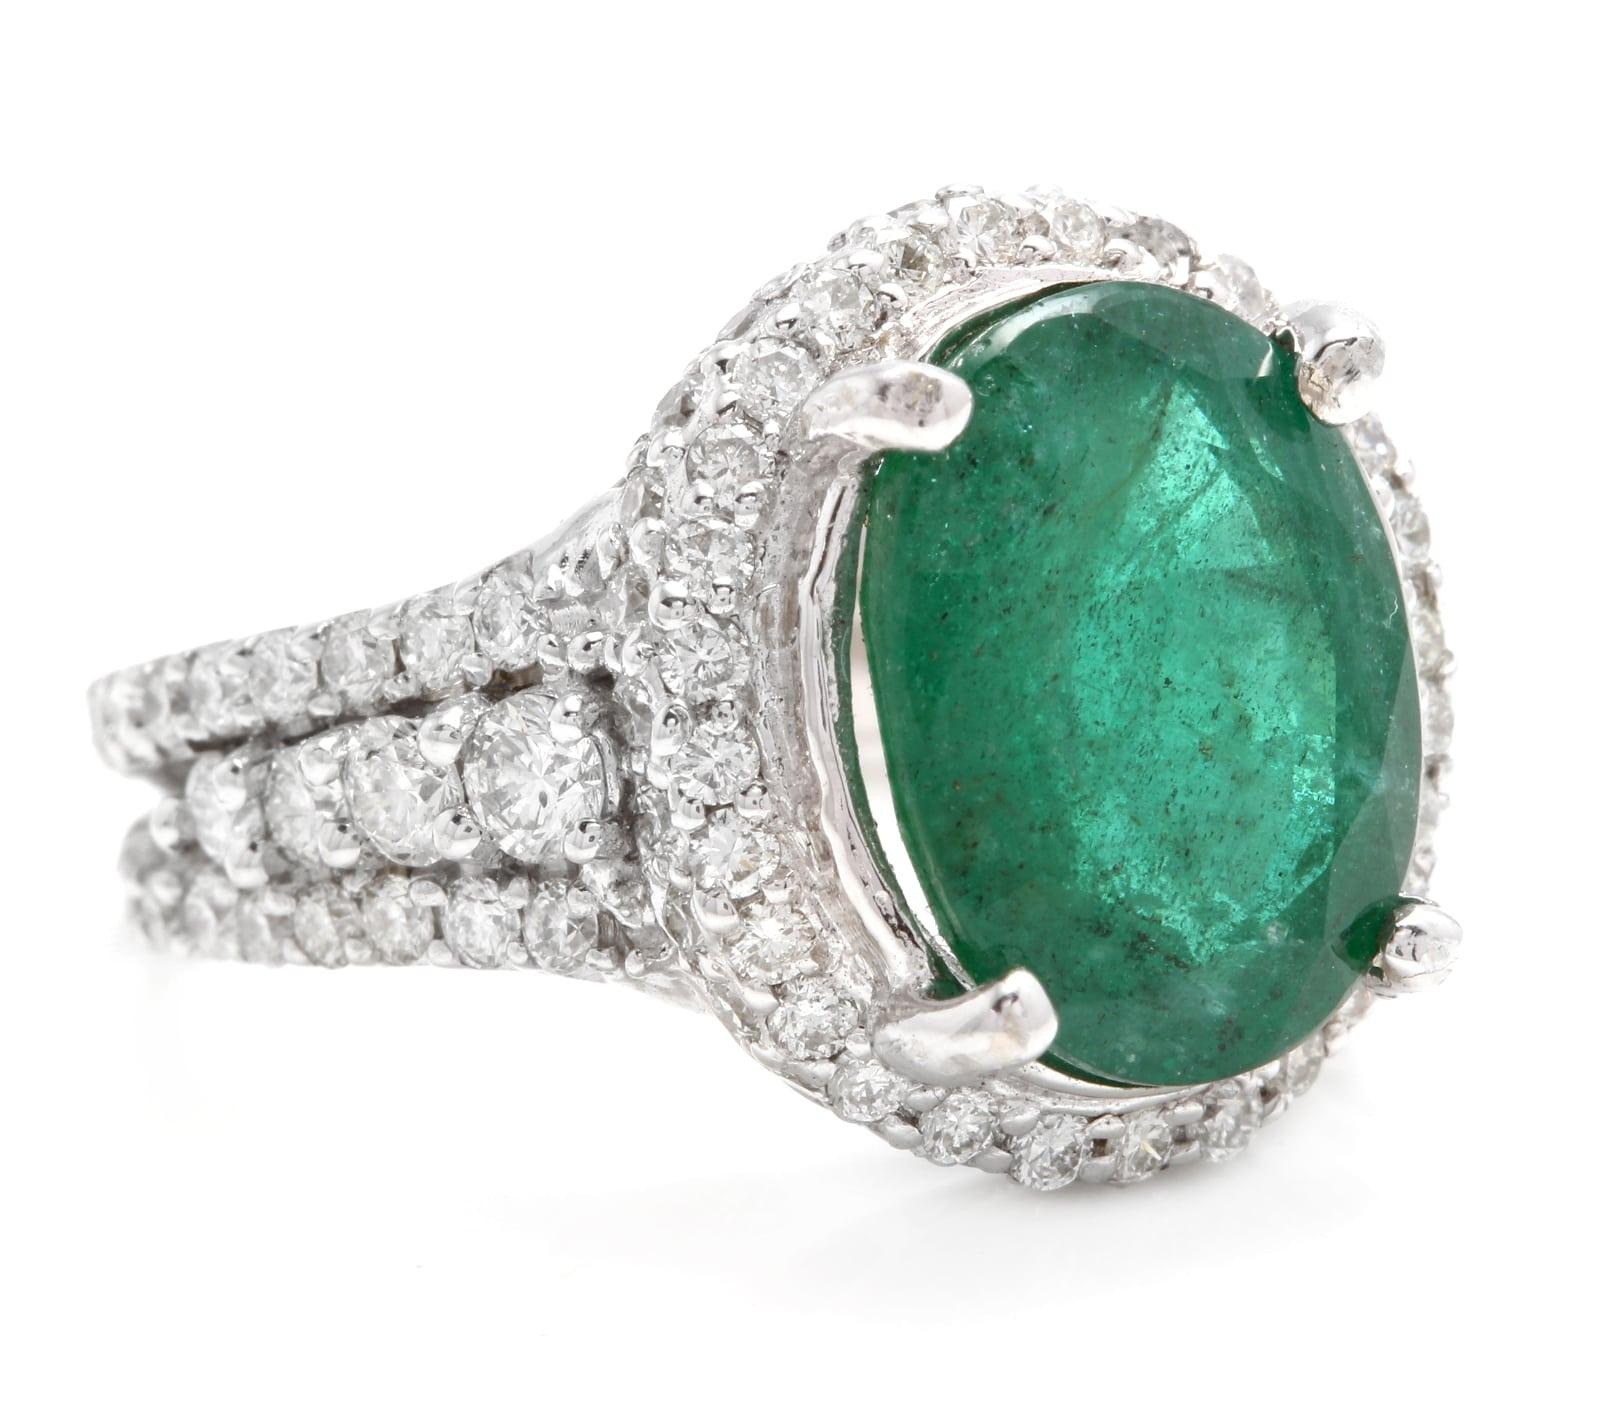 6.80 Carats Natural Emerald and Diamond 14K Solid White Gold Ring

Total Natural Green Emerald Weight is: Approx. 5.30 Carats (transparent)

Emerald Measures: Approx. 13.00 x 100mm

Natural Round Diamonds Weight: Approx. 1.50 Carats (color G-H /